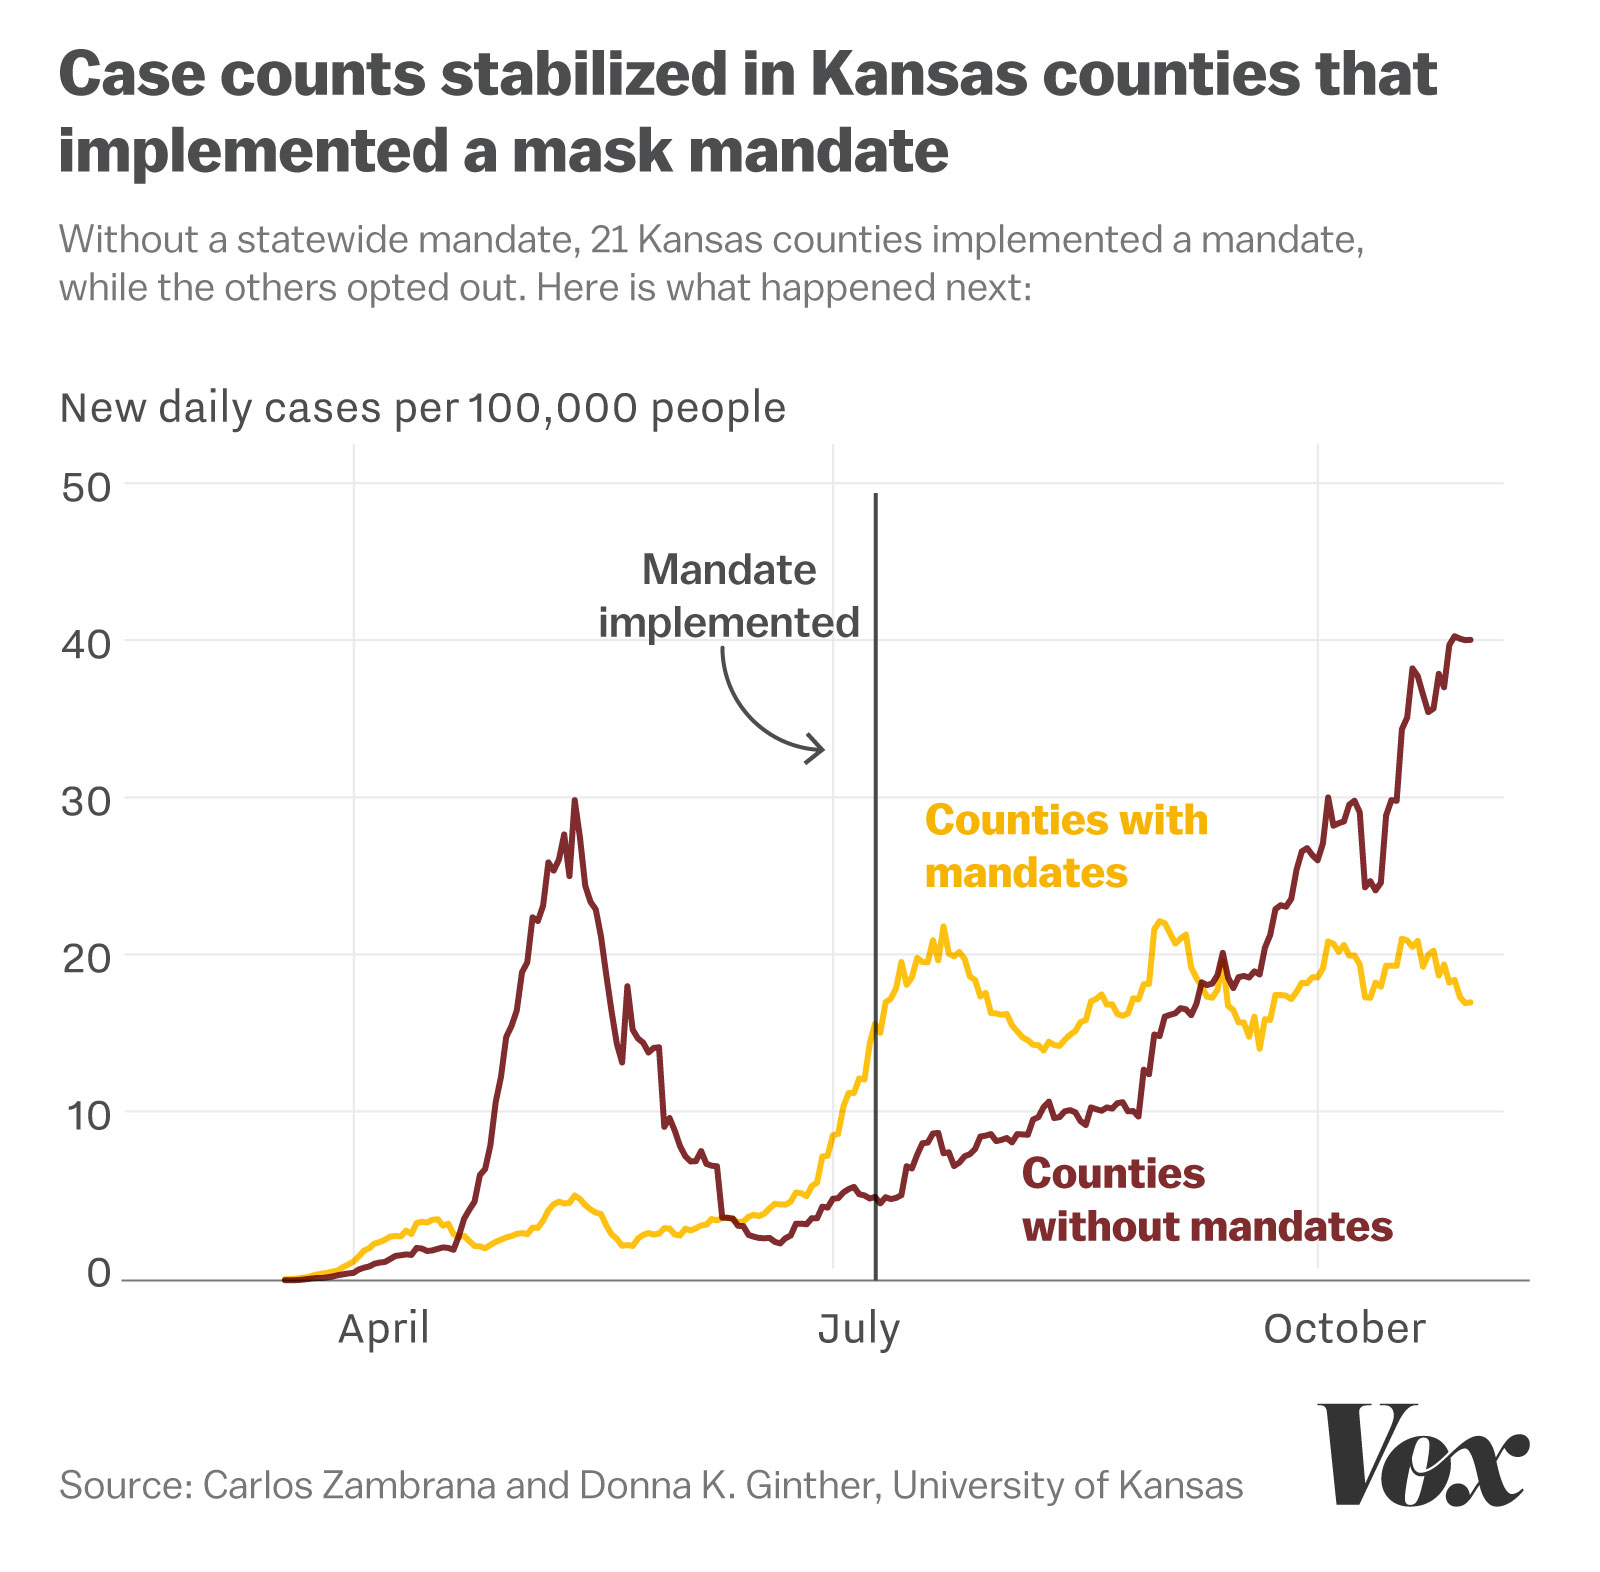 This chart shows that case counts stabilized in Kansas counties that implemented a mask mandate.